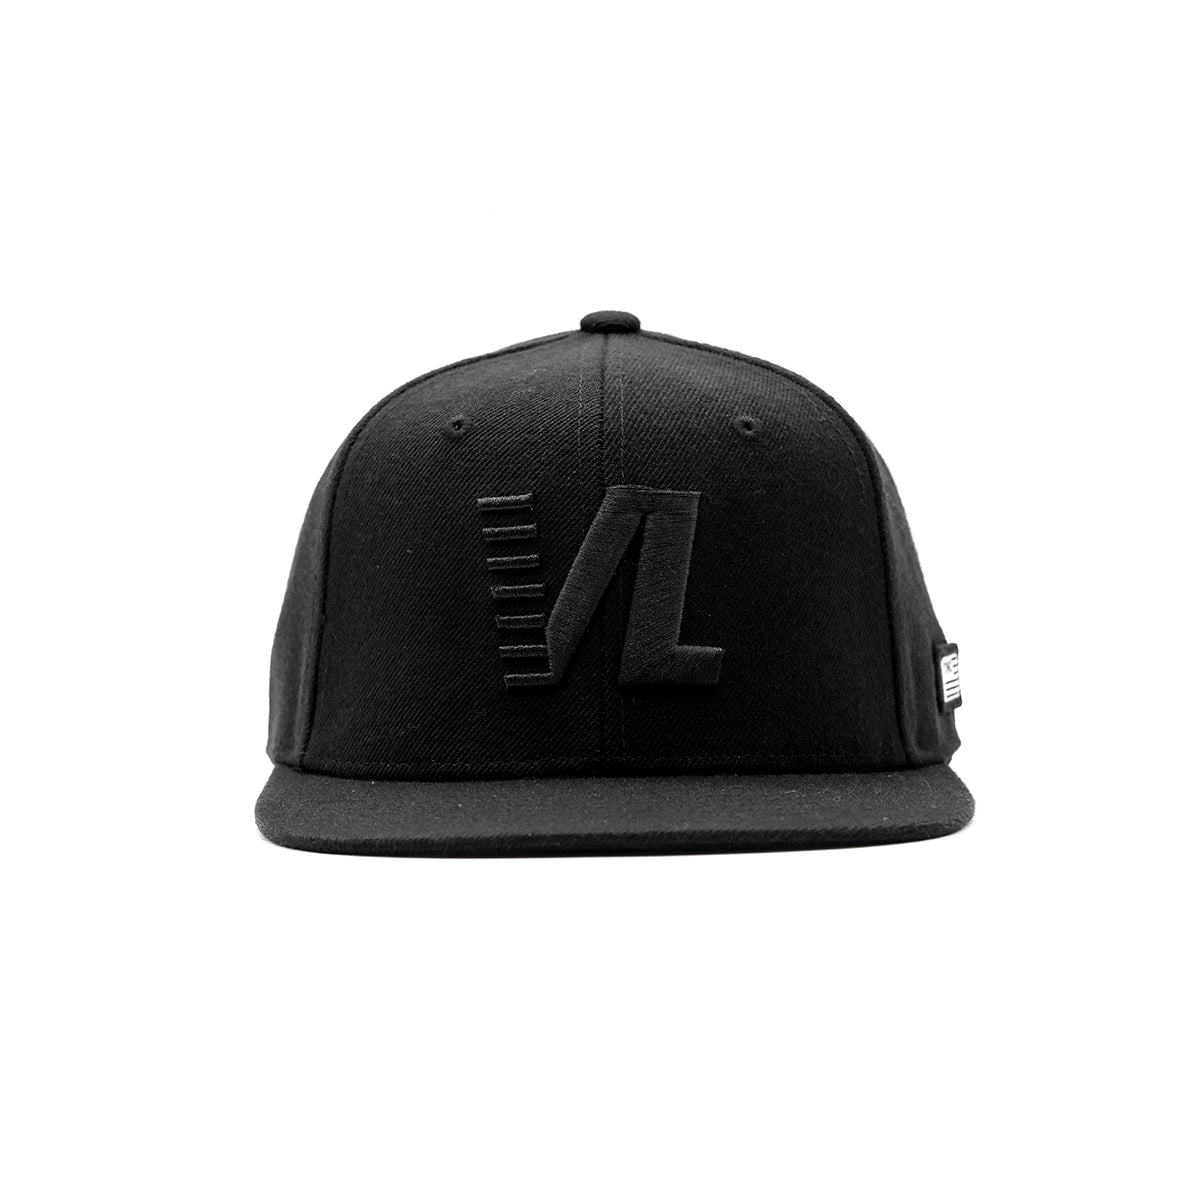 Victory Lap Limited Edition Snapback - Black/Black - Front